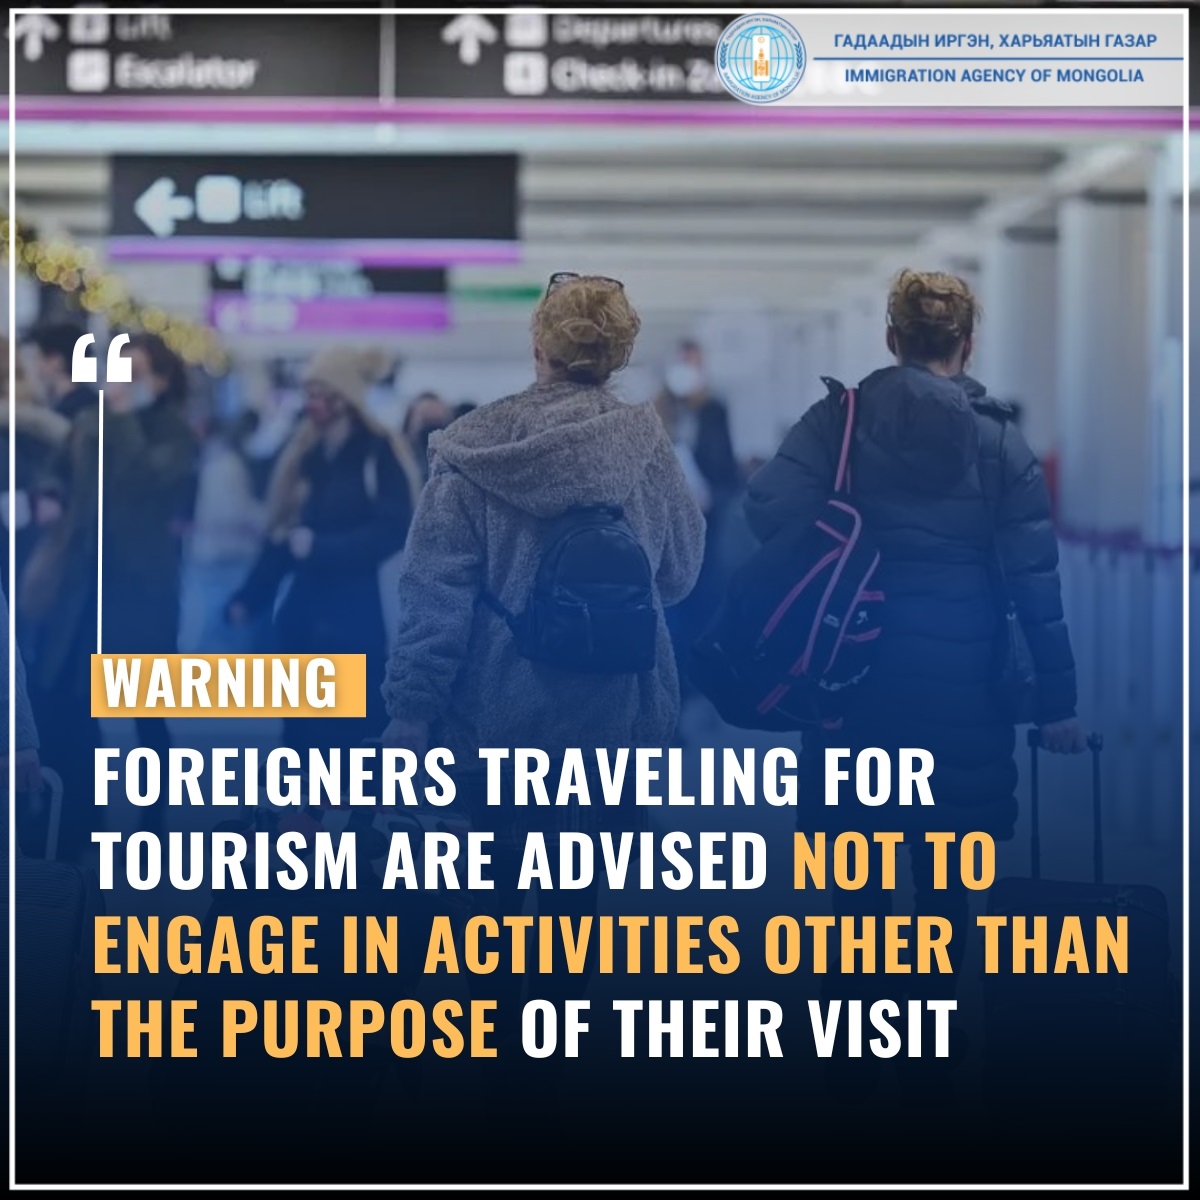 Foreigners traveling for tourism are advised not to engage in activities other than the purpose of their visit